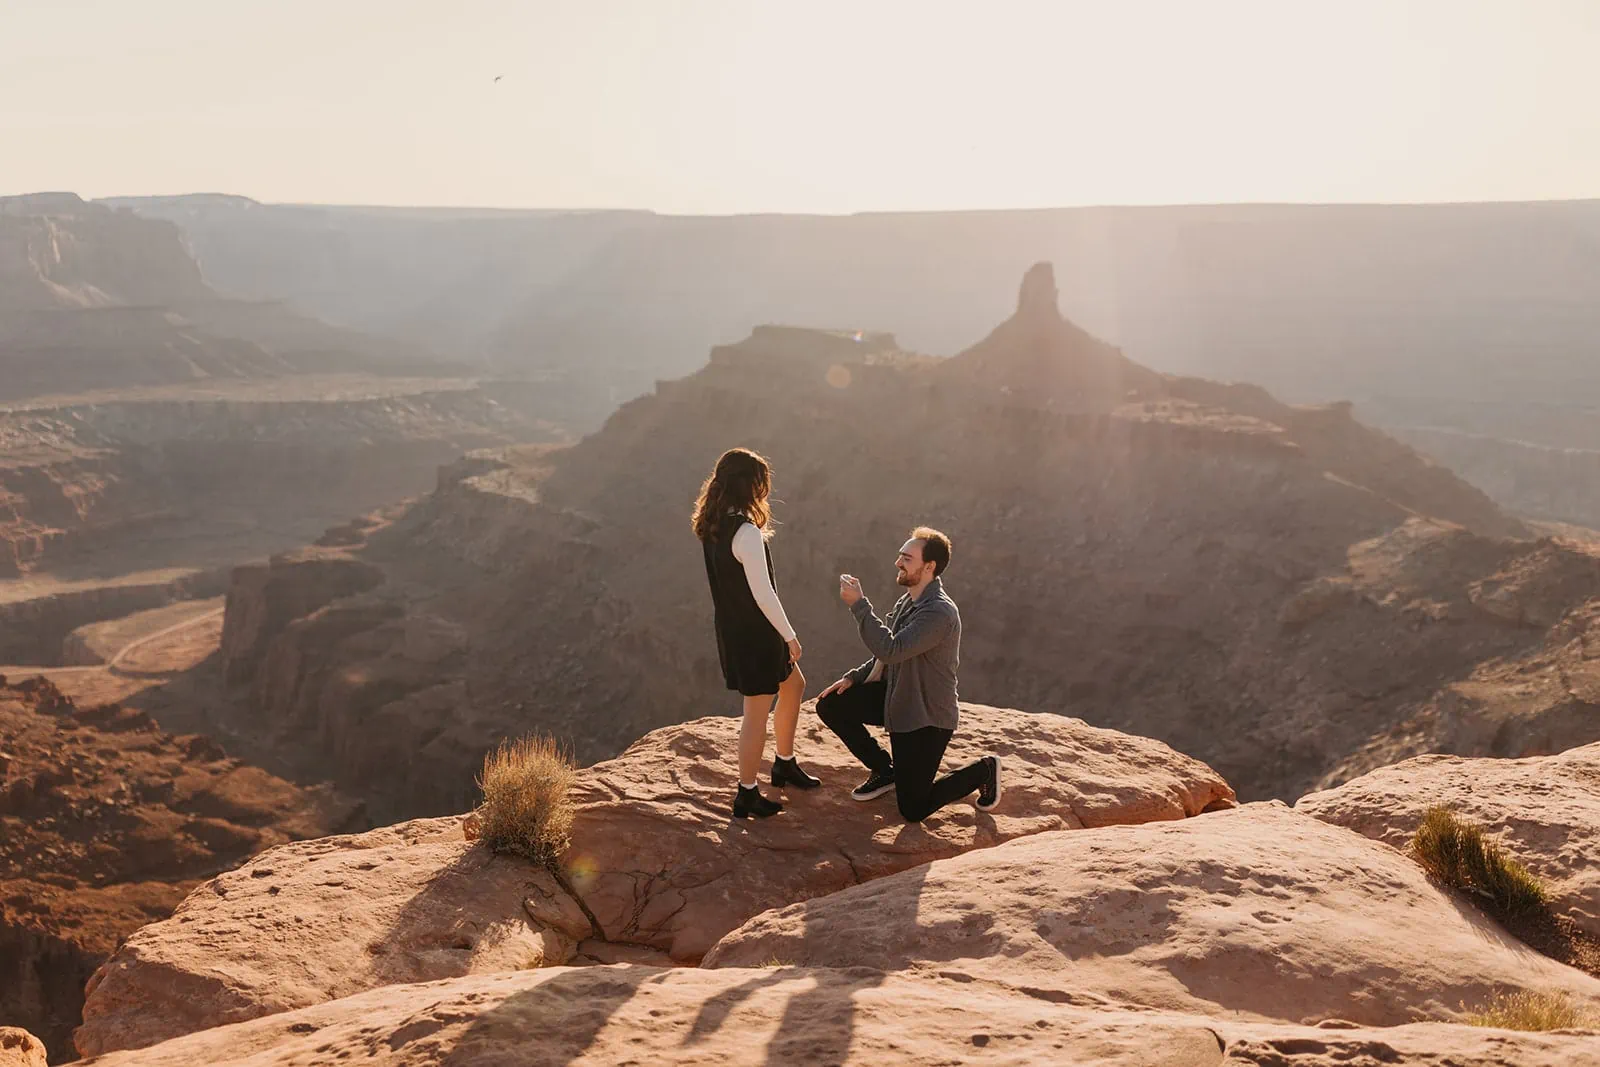 A man gets down on one knee to propose to a woman at a high up vista point in Moab